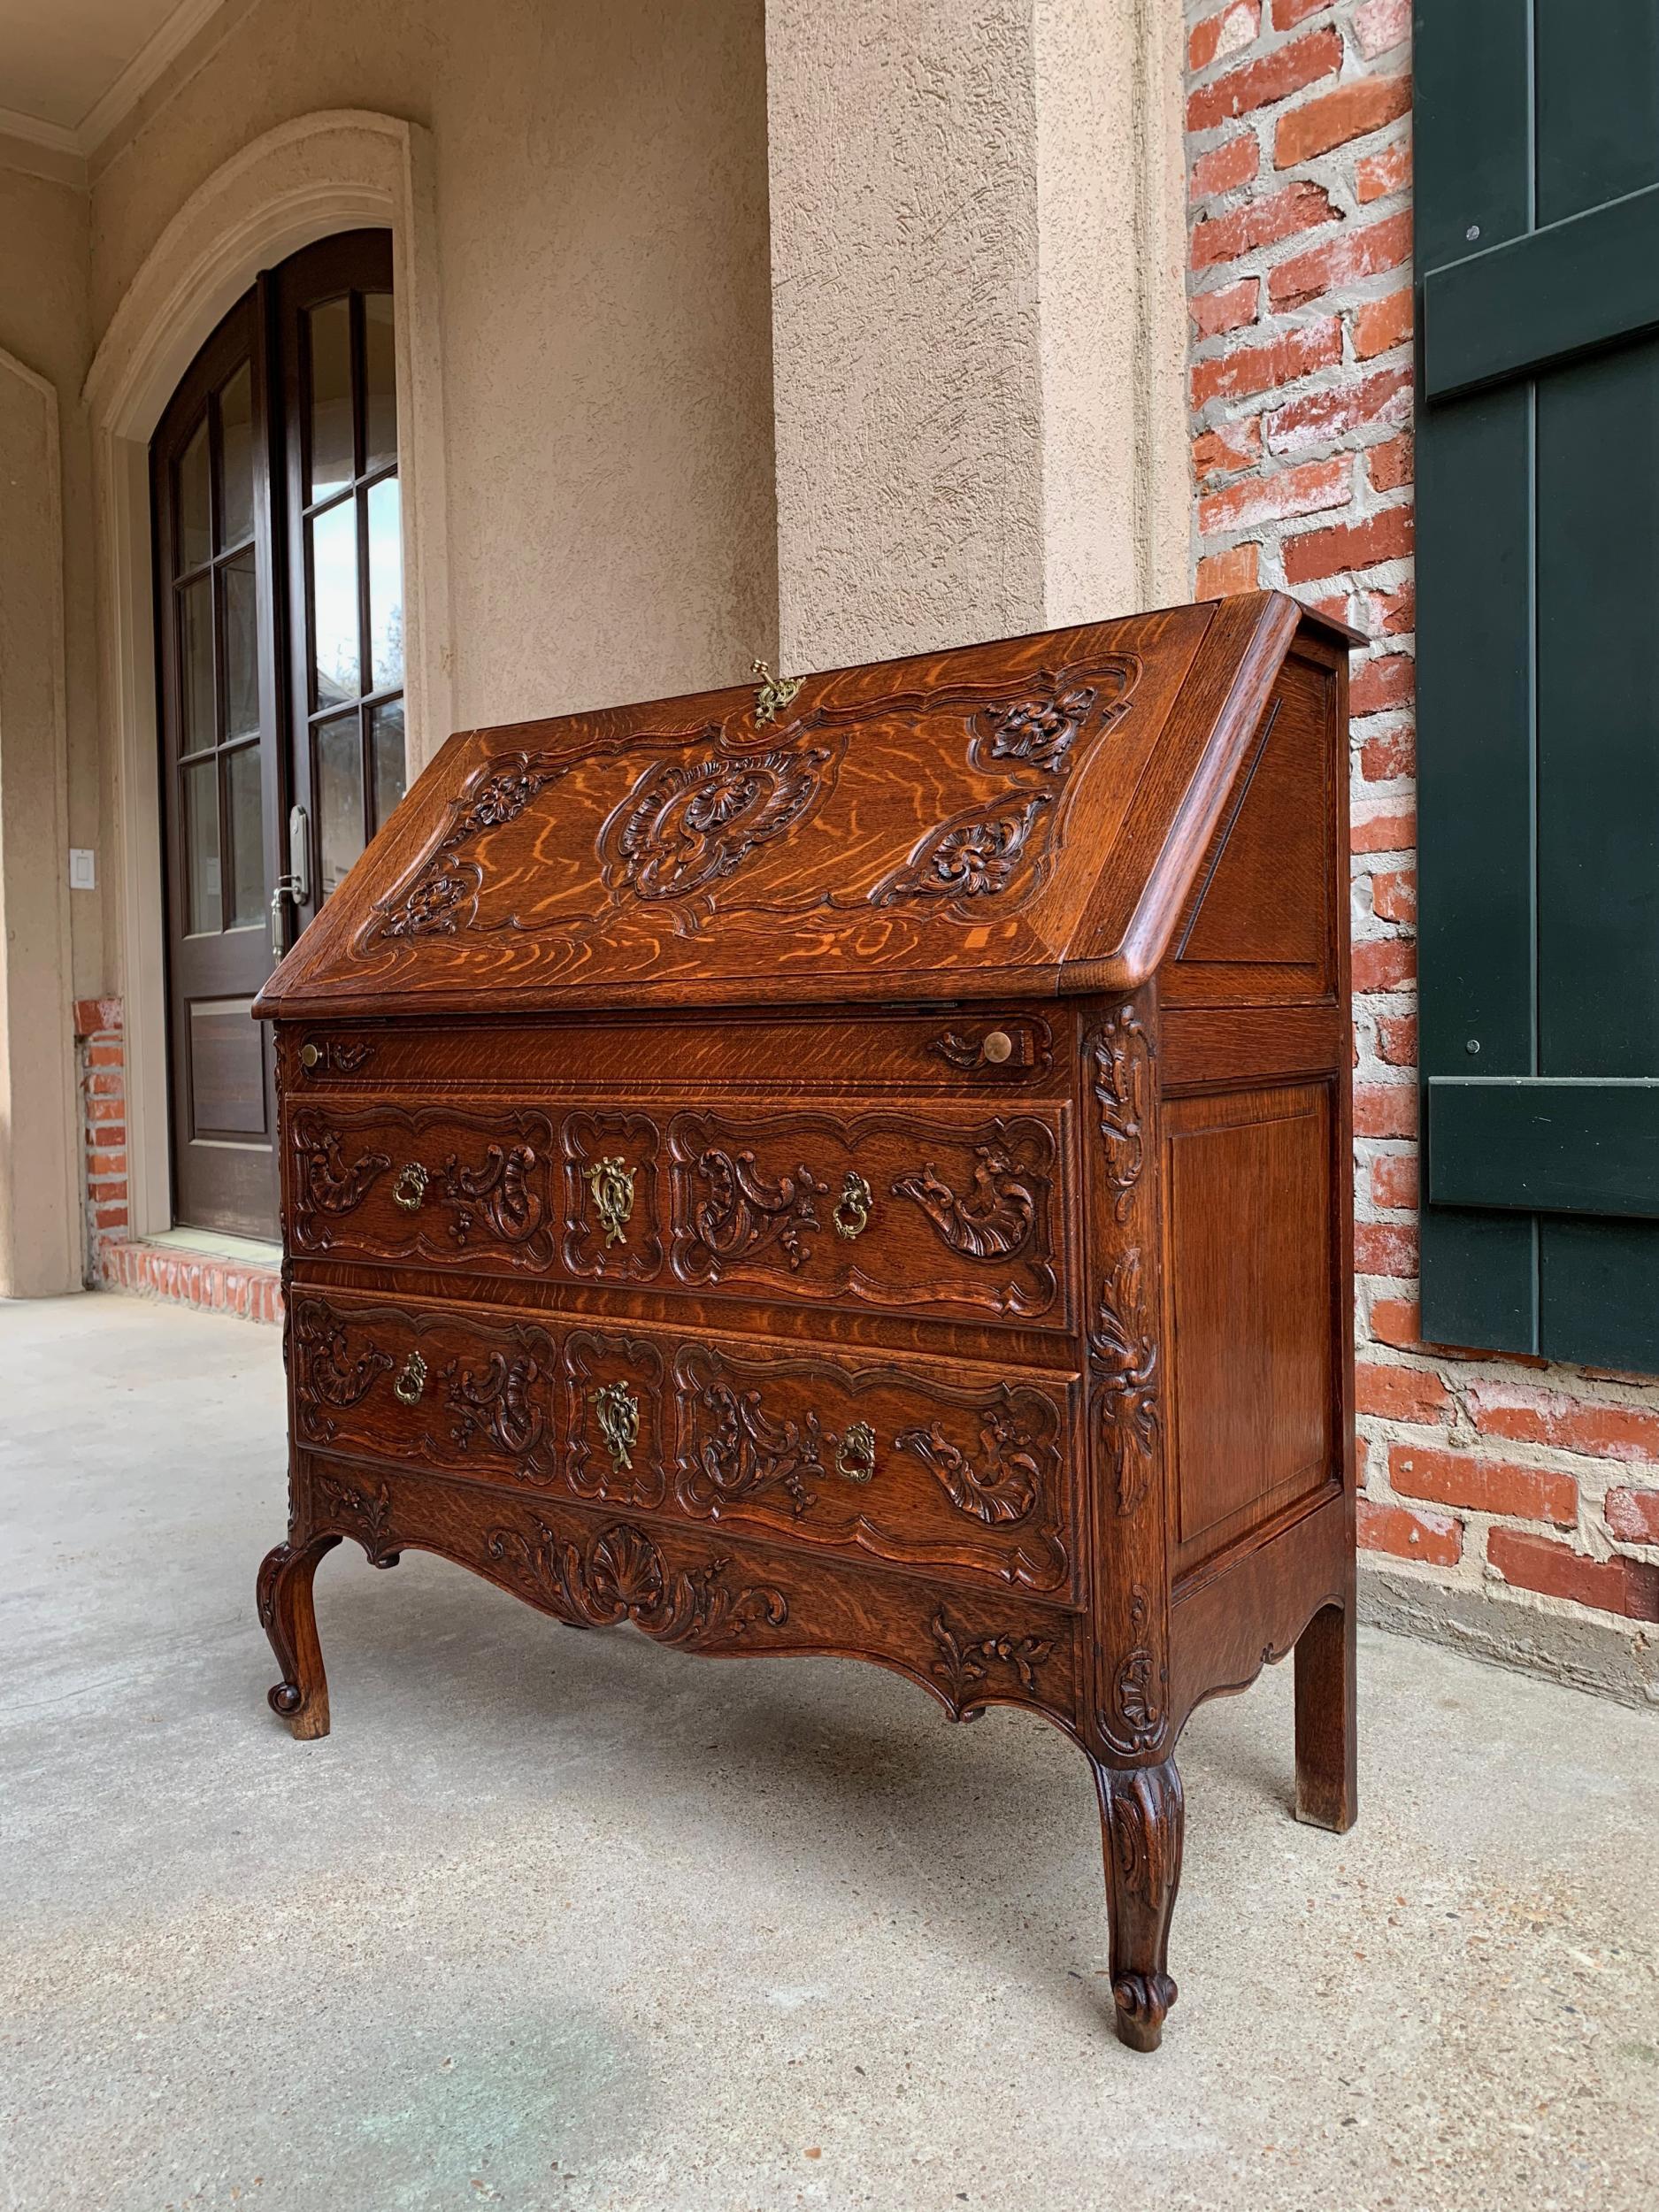 Antique French carved dark oak secretary desk bureau drop front Louis XV style

~ Direct from France
~ A lovely antique French carved “drop front” secretary/desk with quintessential French style from top to bottom!
~ Carved oak French “drop